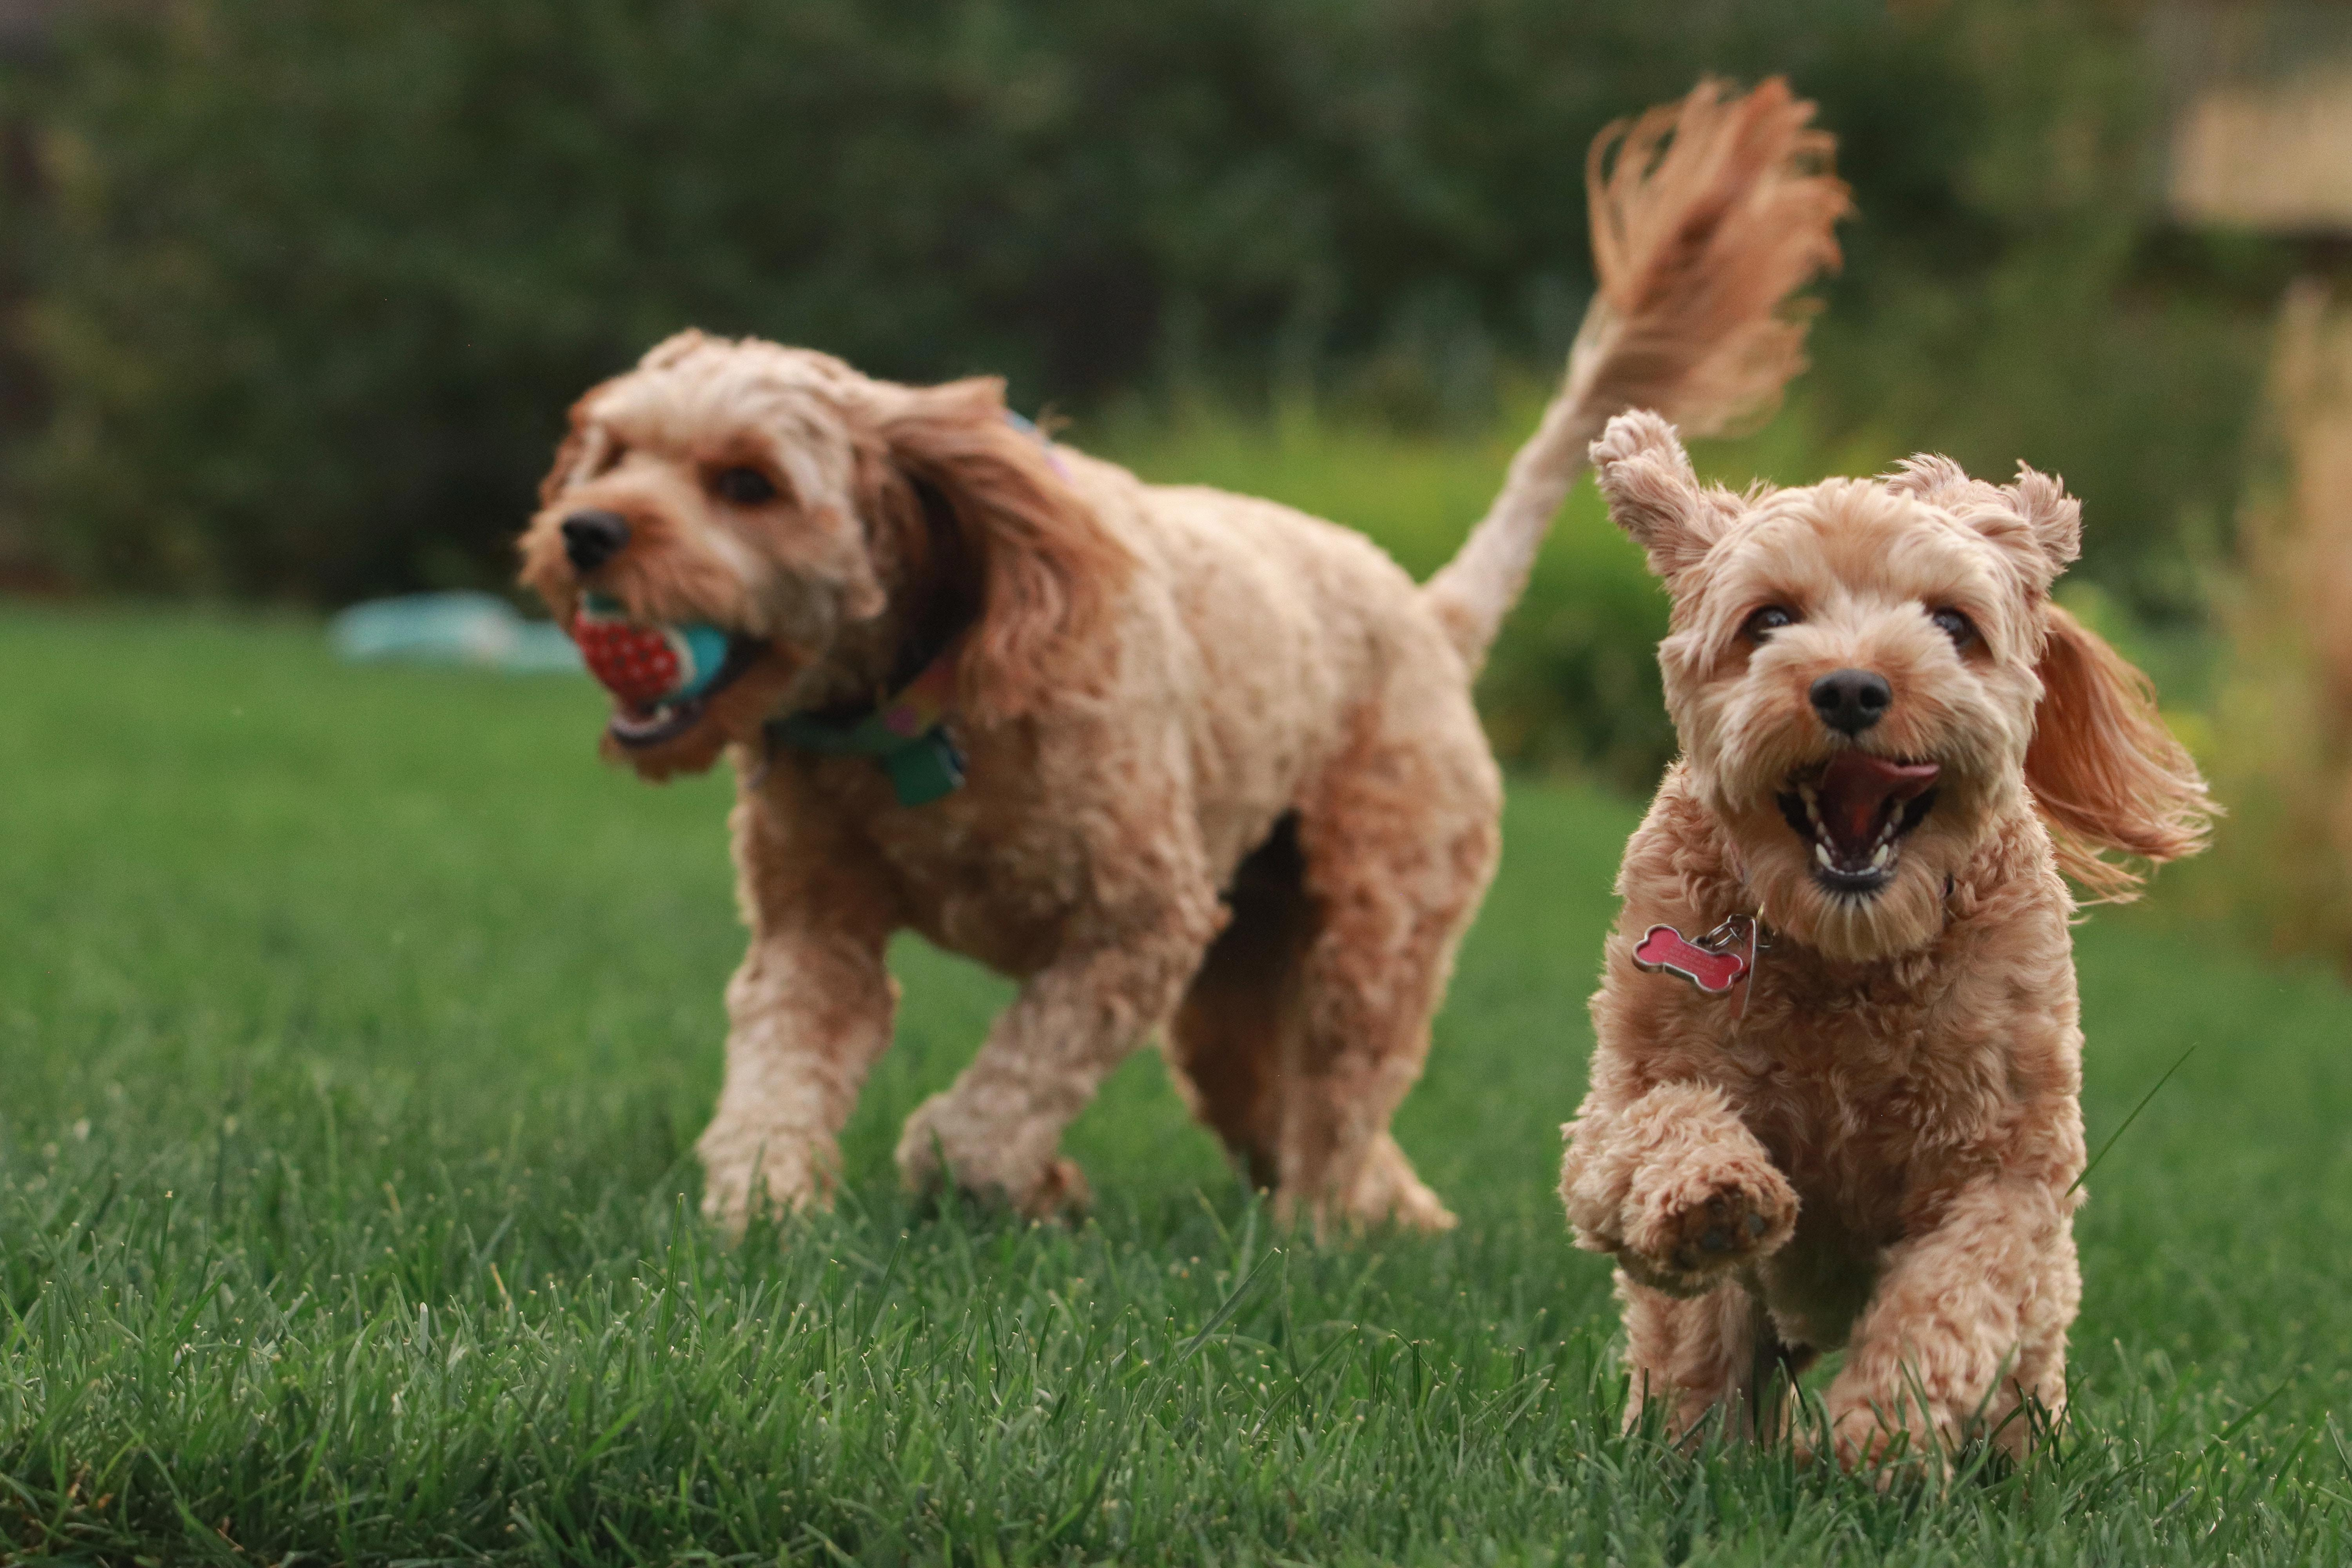 "Giving Your Goldendoodle the Best Nutrition: The Best Food for Goldendoodles"